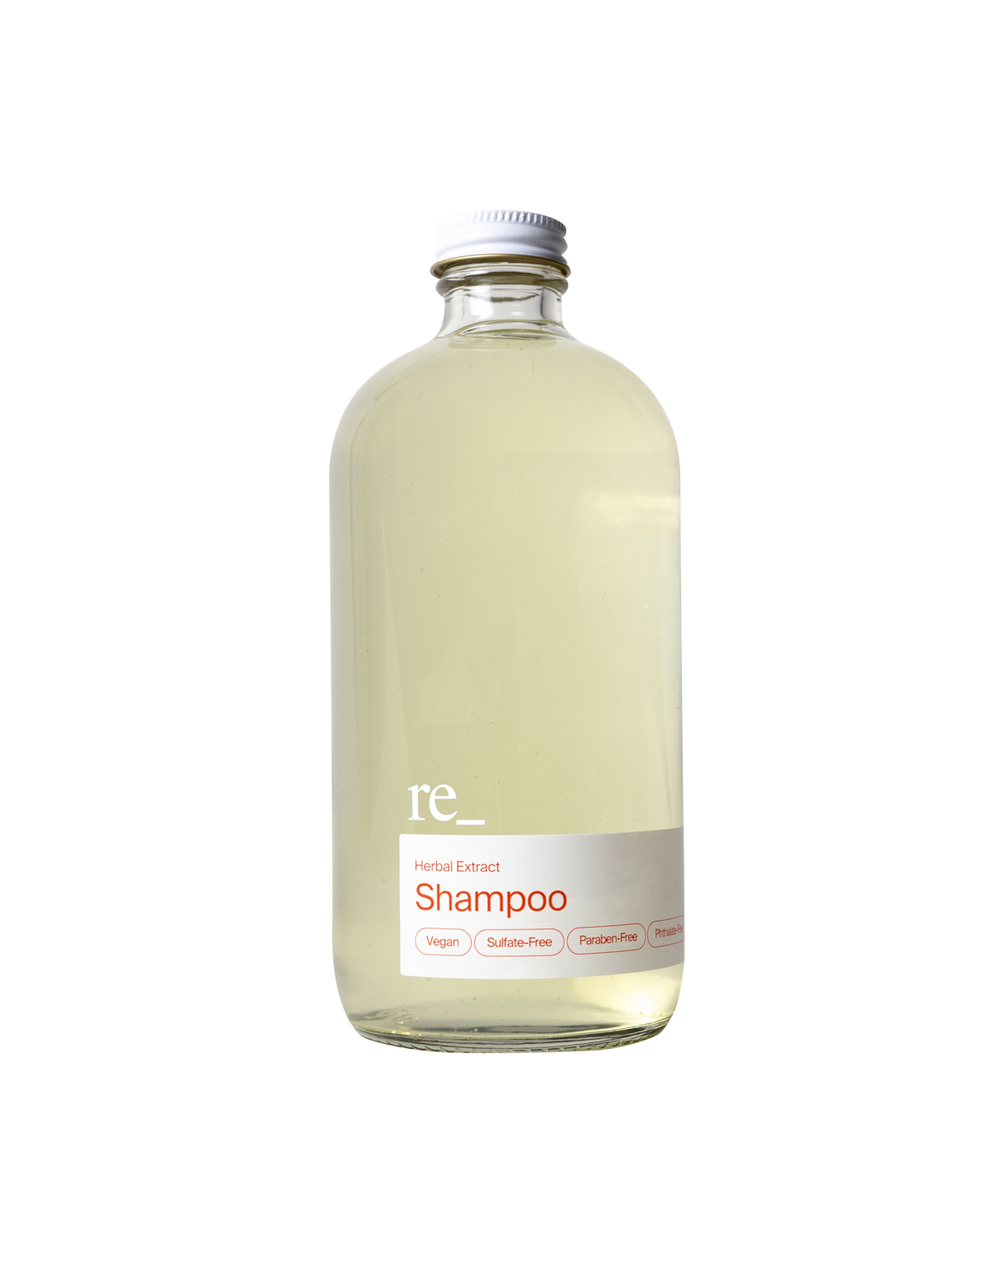 Shampoo, Herbal Extract, 16oz Bottle re_